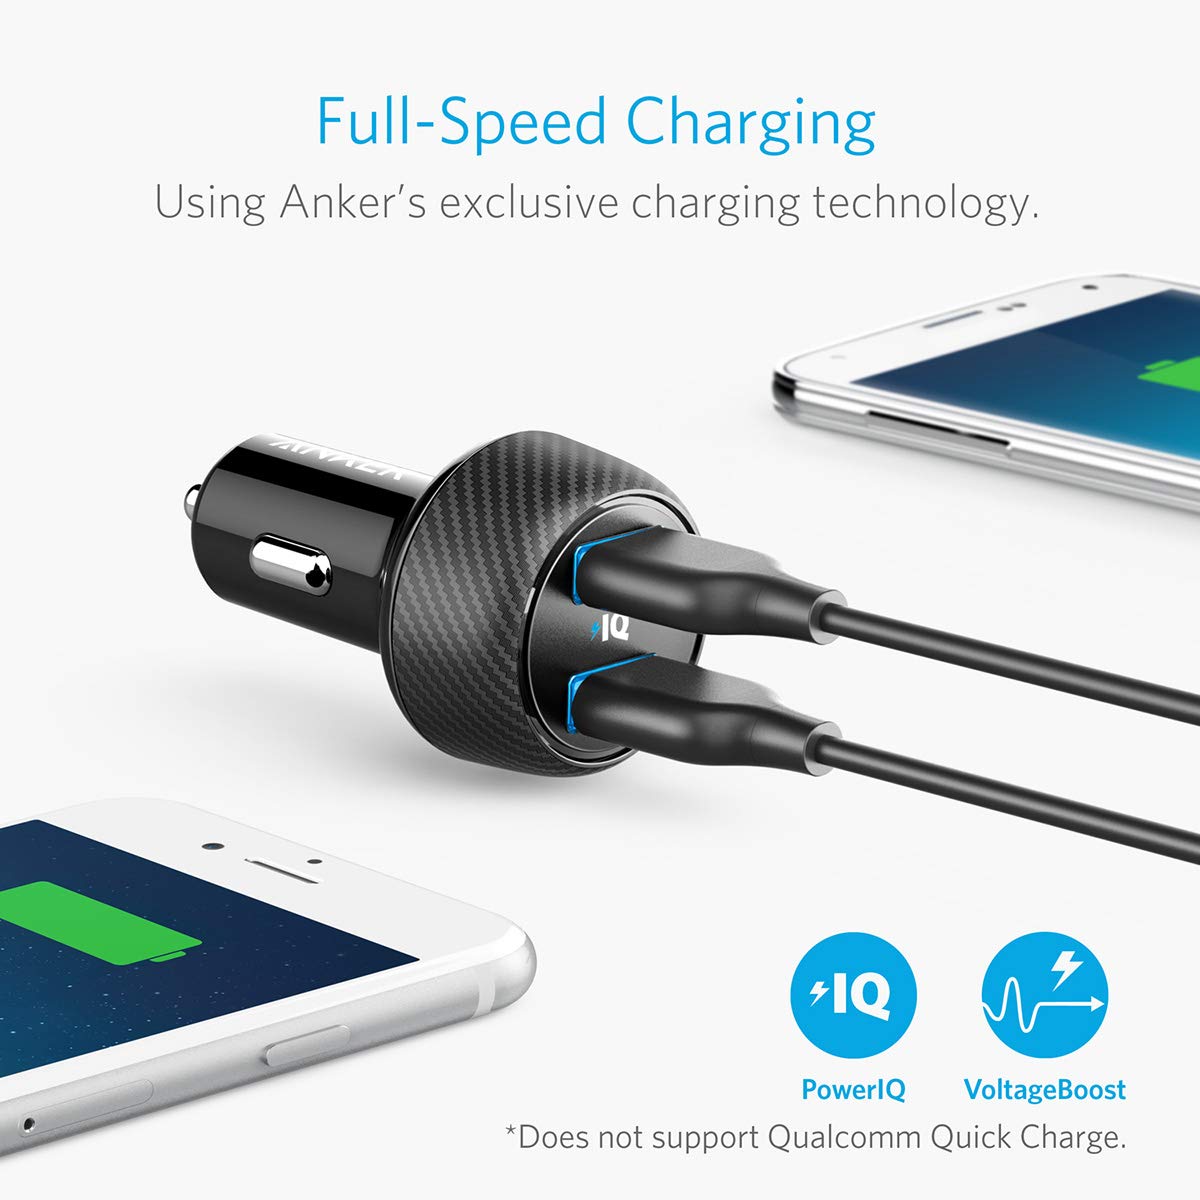 Anker 24W 4.8A Car Charger, 2-Port Ultra-Compact PowerDrive 2 Elite with PowerIQ Technology and LED for iPhone XS/Max/XR/X/8/7/6/Plus, iPad Pro/Air/Mini, Galaxy Note/S Series, LG, Nexus, HTC, and More